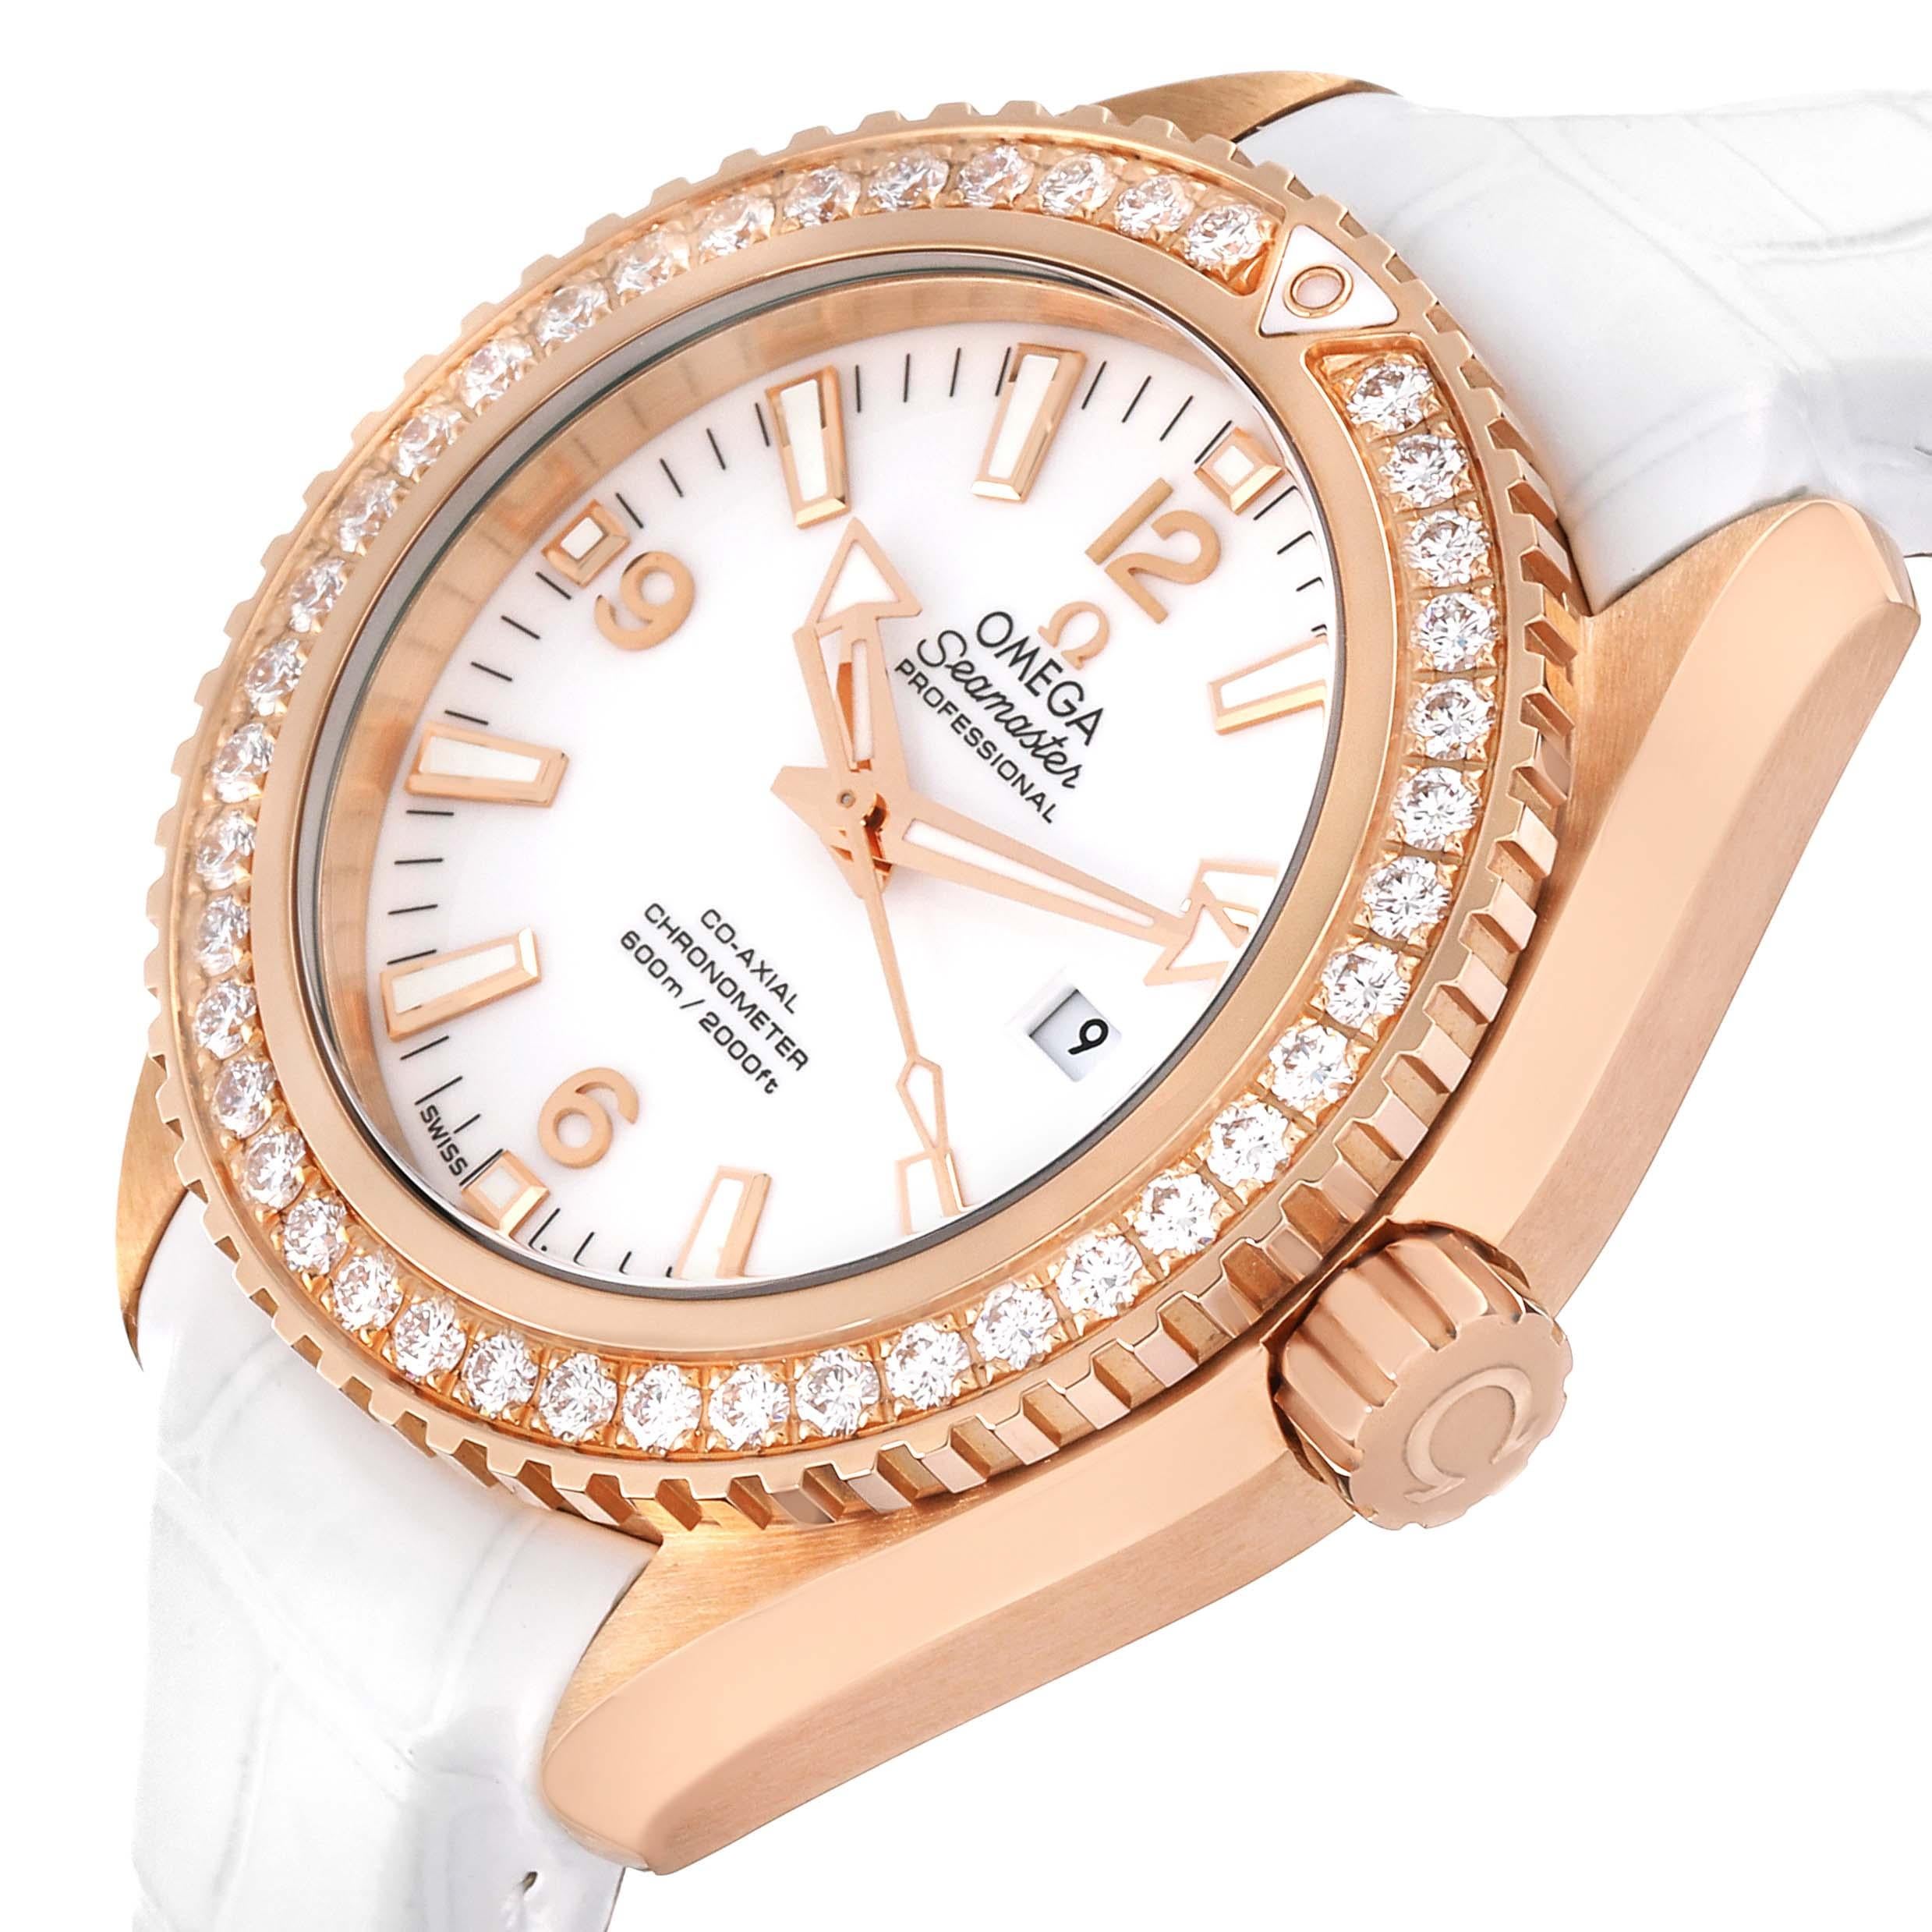 Omega Seamaster Planet Ocean Rose Gold Diamond Ladies Watch 232.58.38.20.04.001 Unworn. Self-winding movement with Co-Axial escapement. Free sprung-balance system with silicon balance-spring. Automatic winding in both directions. Oscillating mass